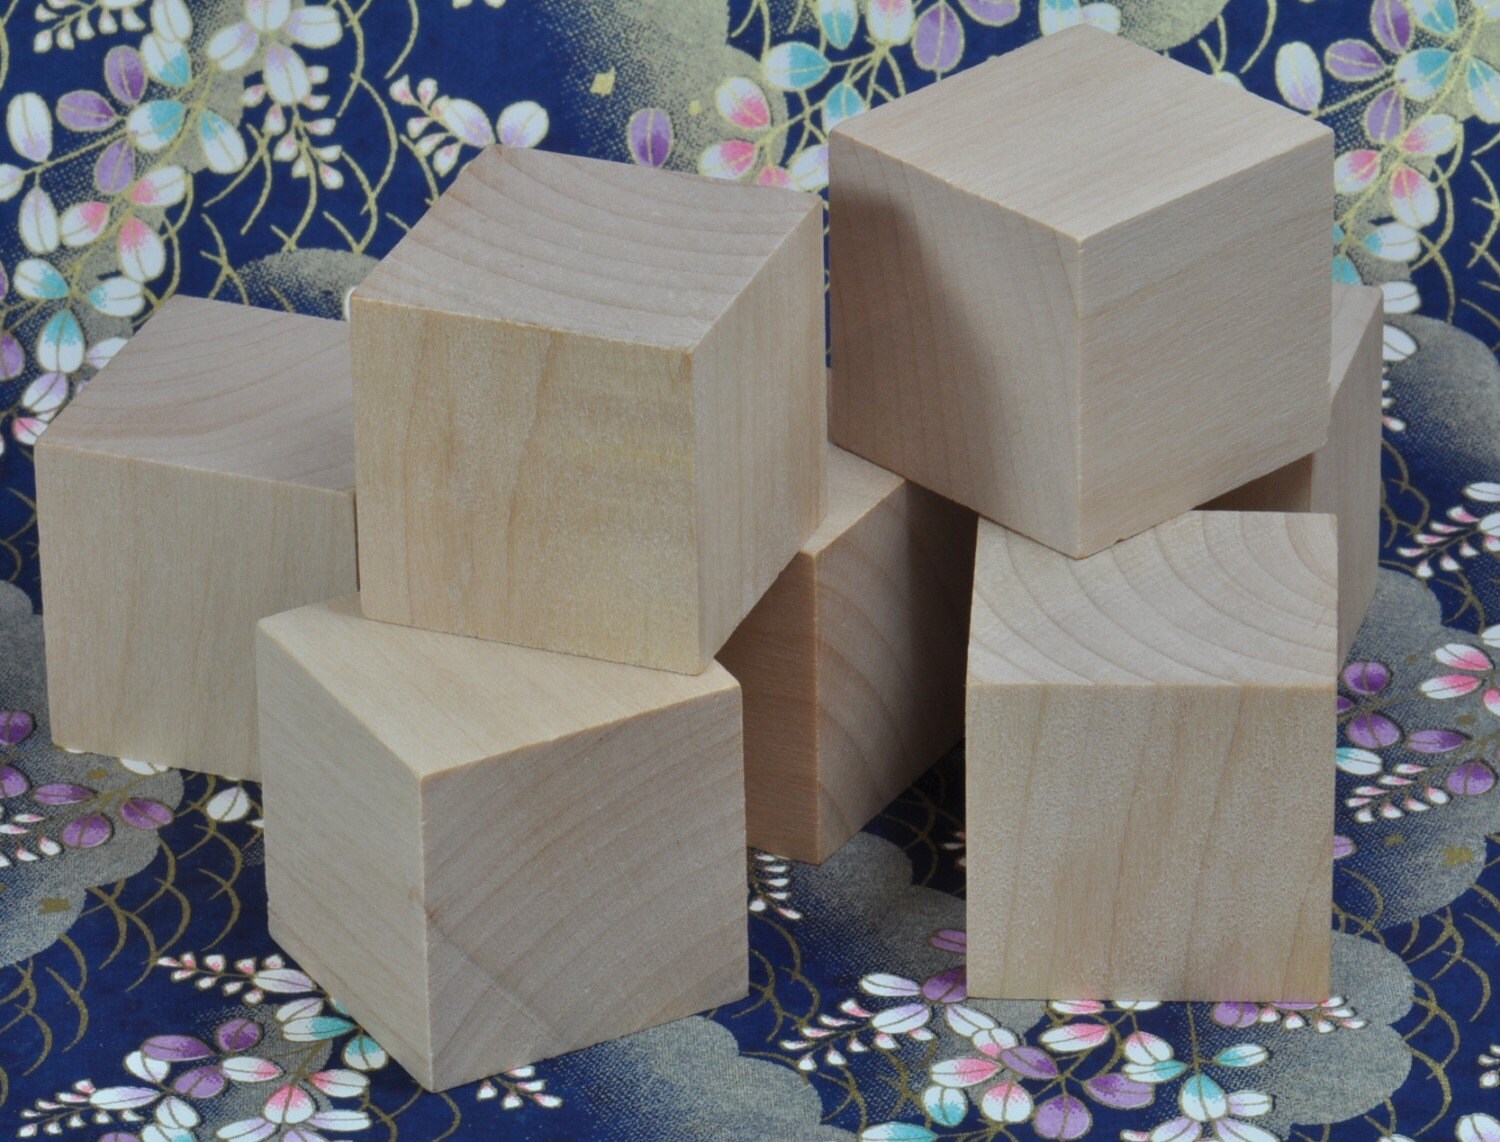 Two Trees Unfinished Wooden Blocks 15mm Pack of 50 Small Wood Cubes for Engraver Crafts Making and DIY Home Decor Engraving Projects, Size: 2